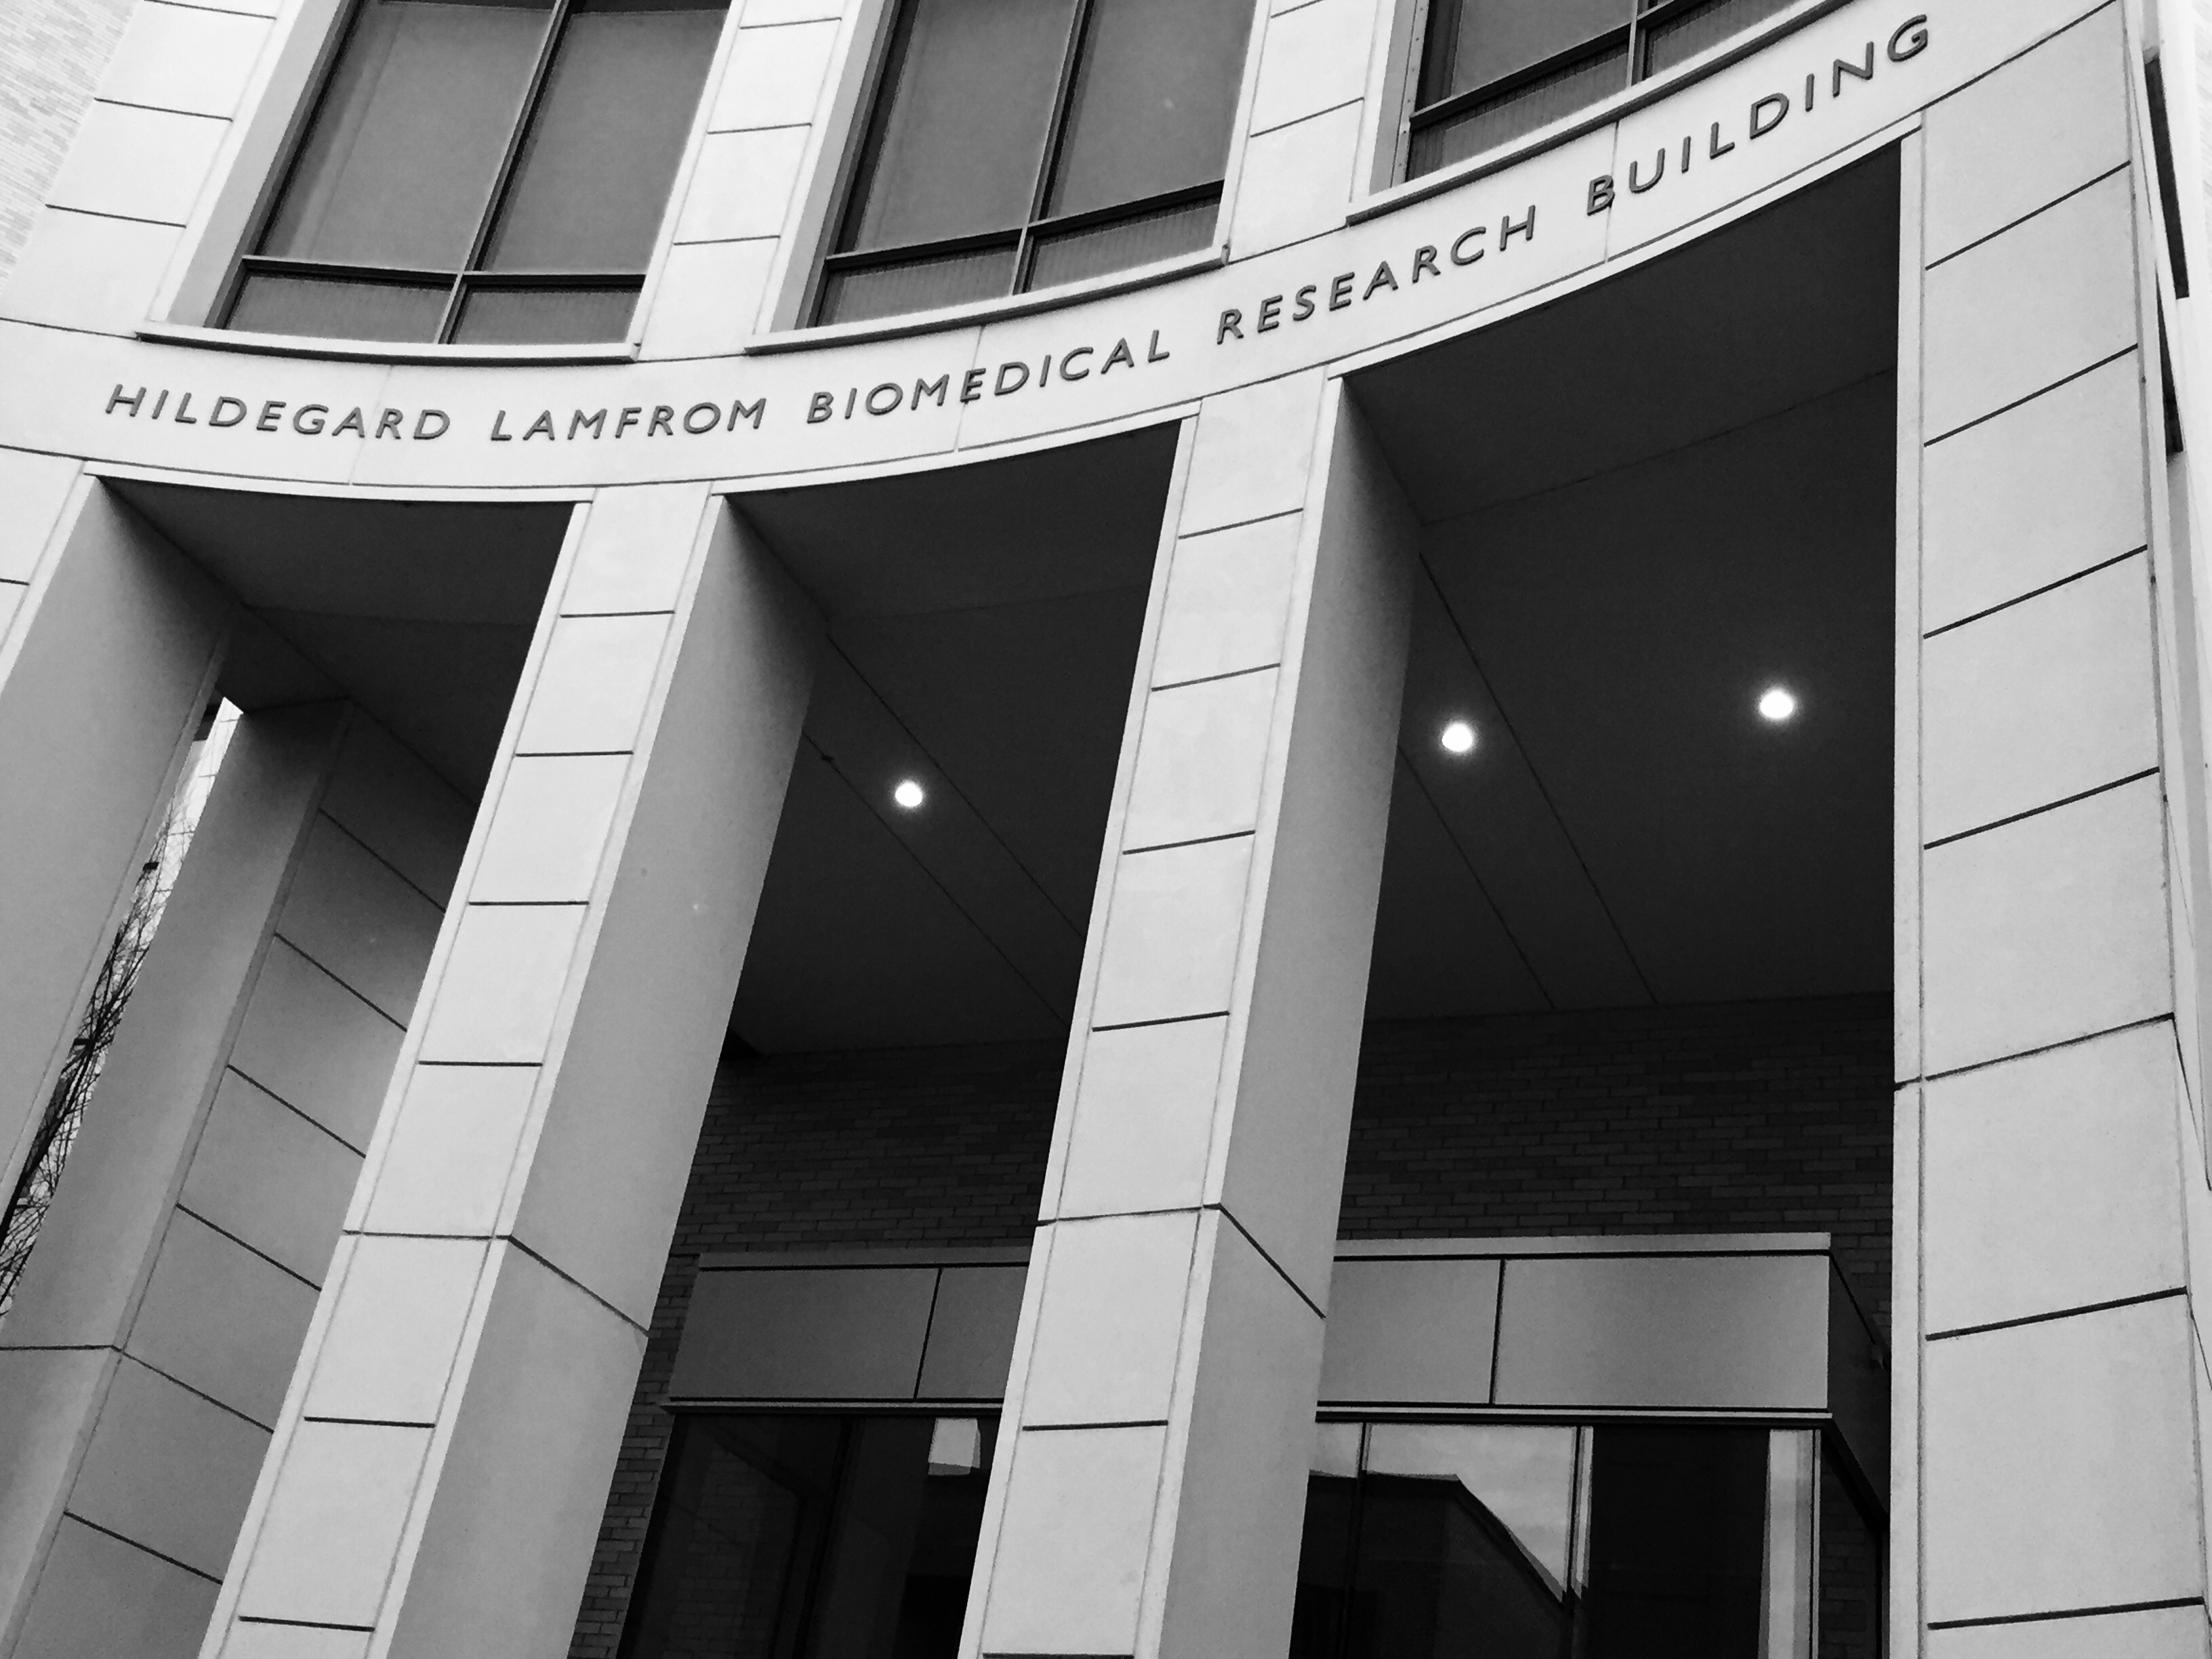 Exterior shot of the Lamfrom Biomedical Research Building